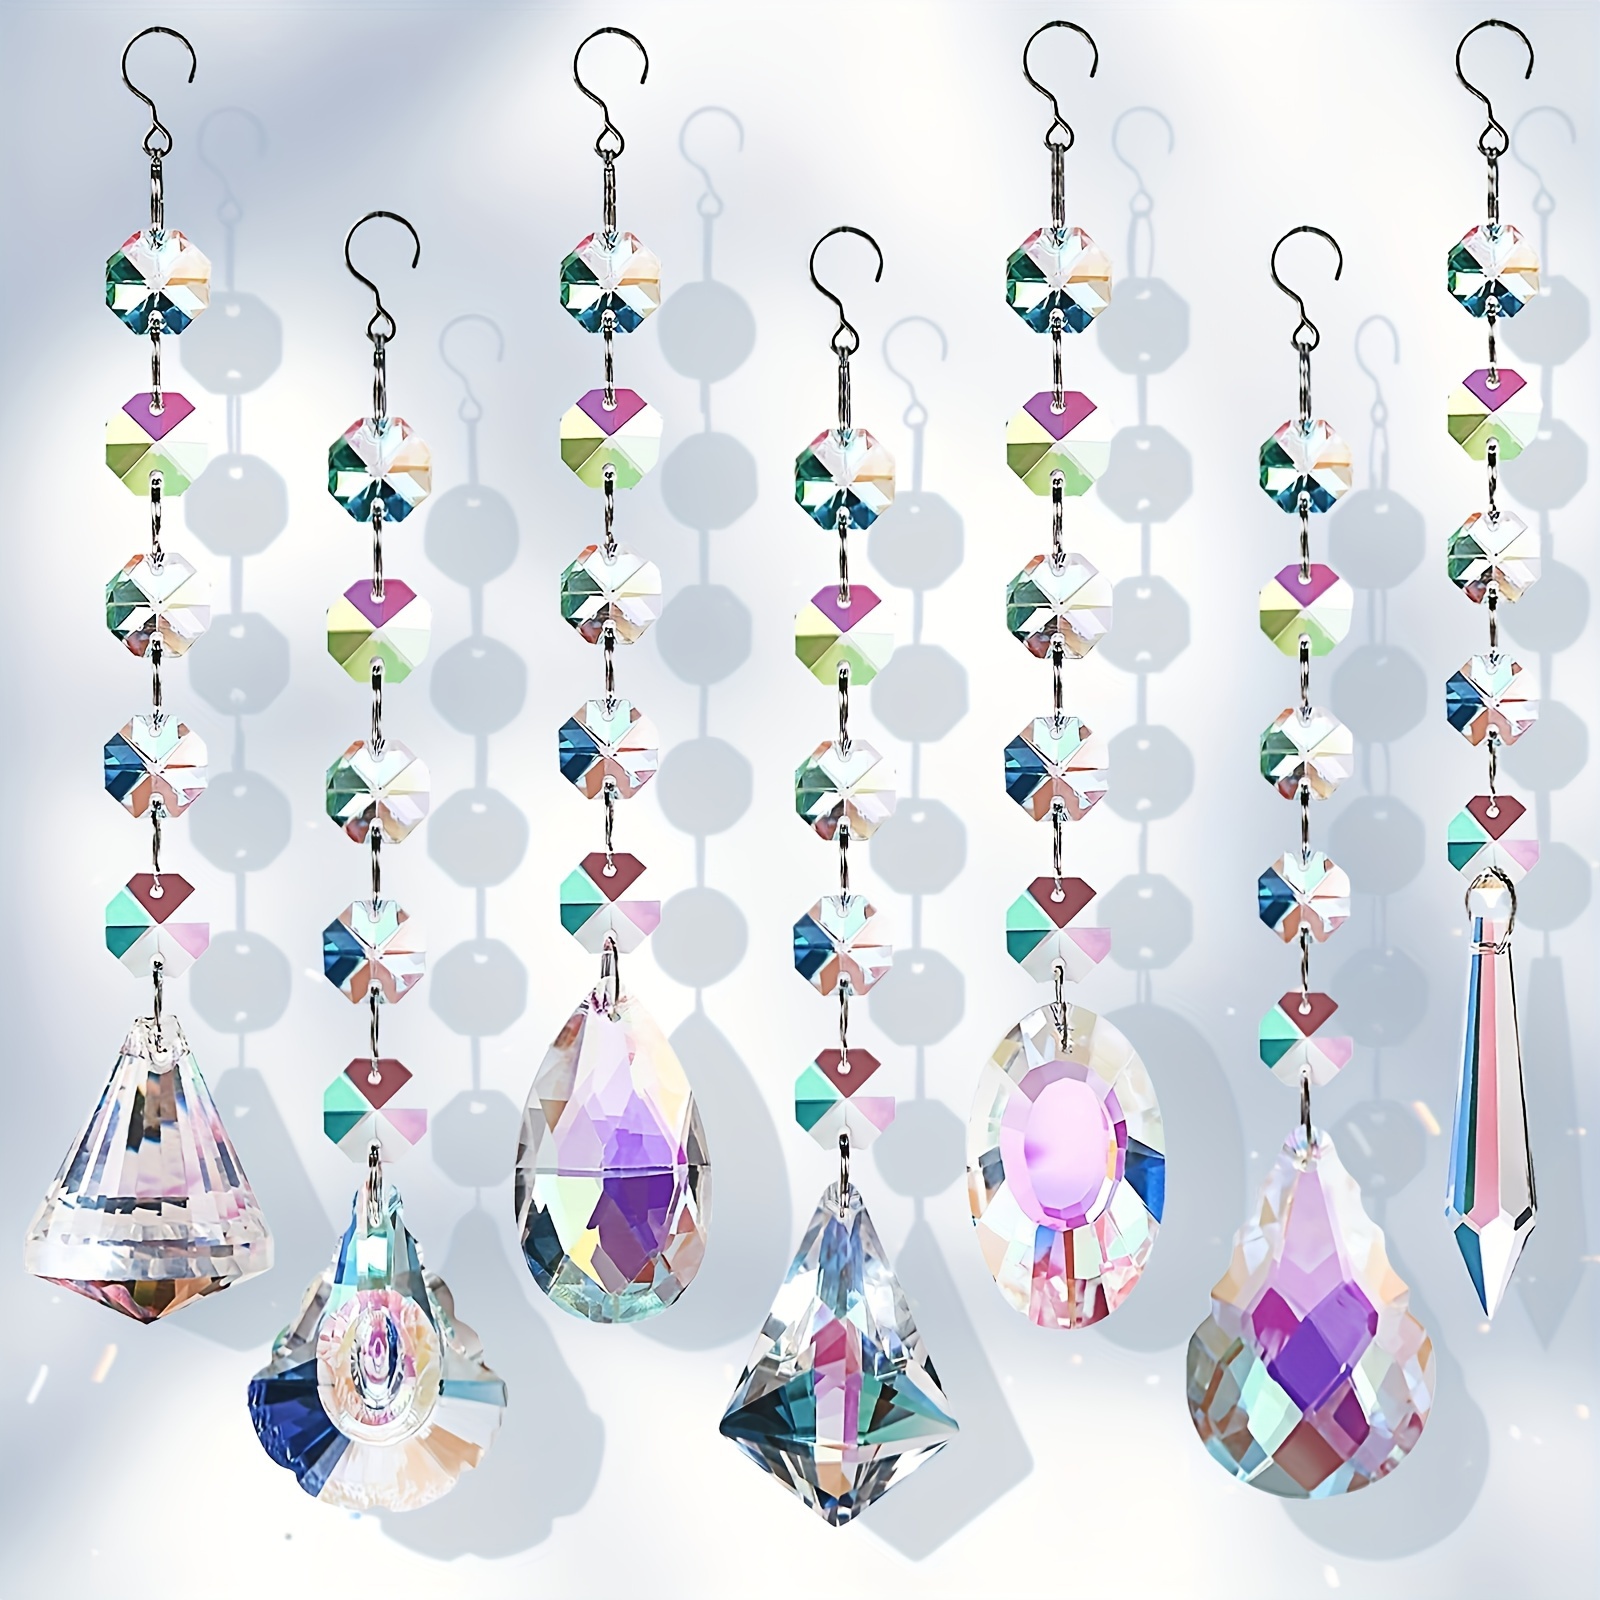 

7-piece Set Suncatcher Crystal Bead Rainbow Prism Ball Pendant Colorful Hangings For Garden Home Office Window Decoration - Glass And Metal